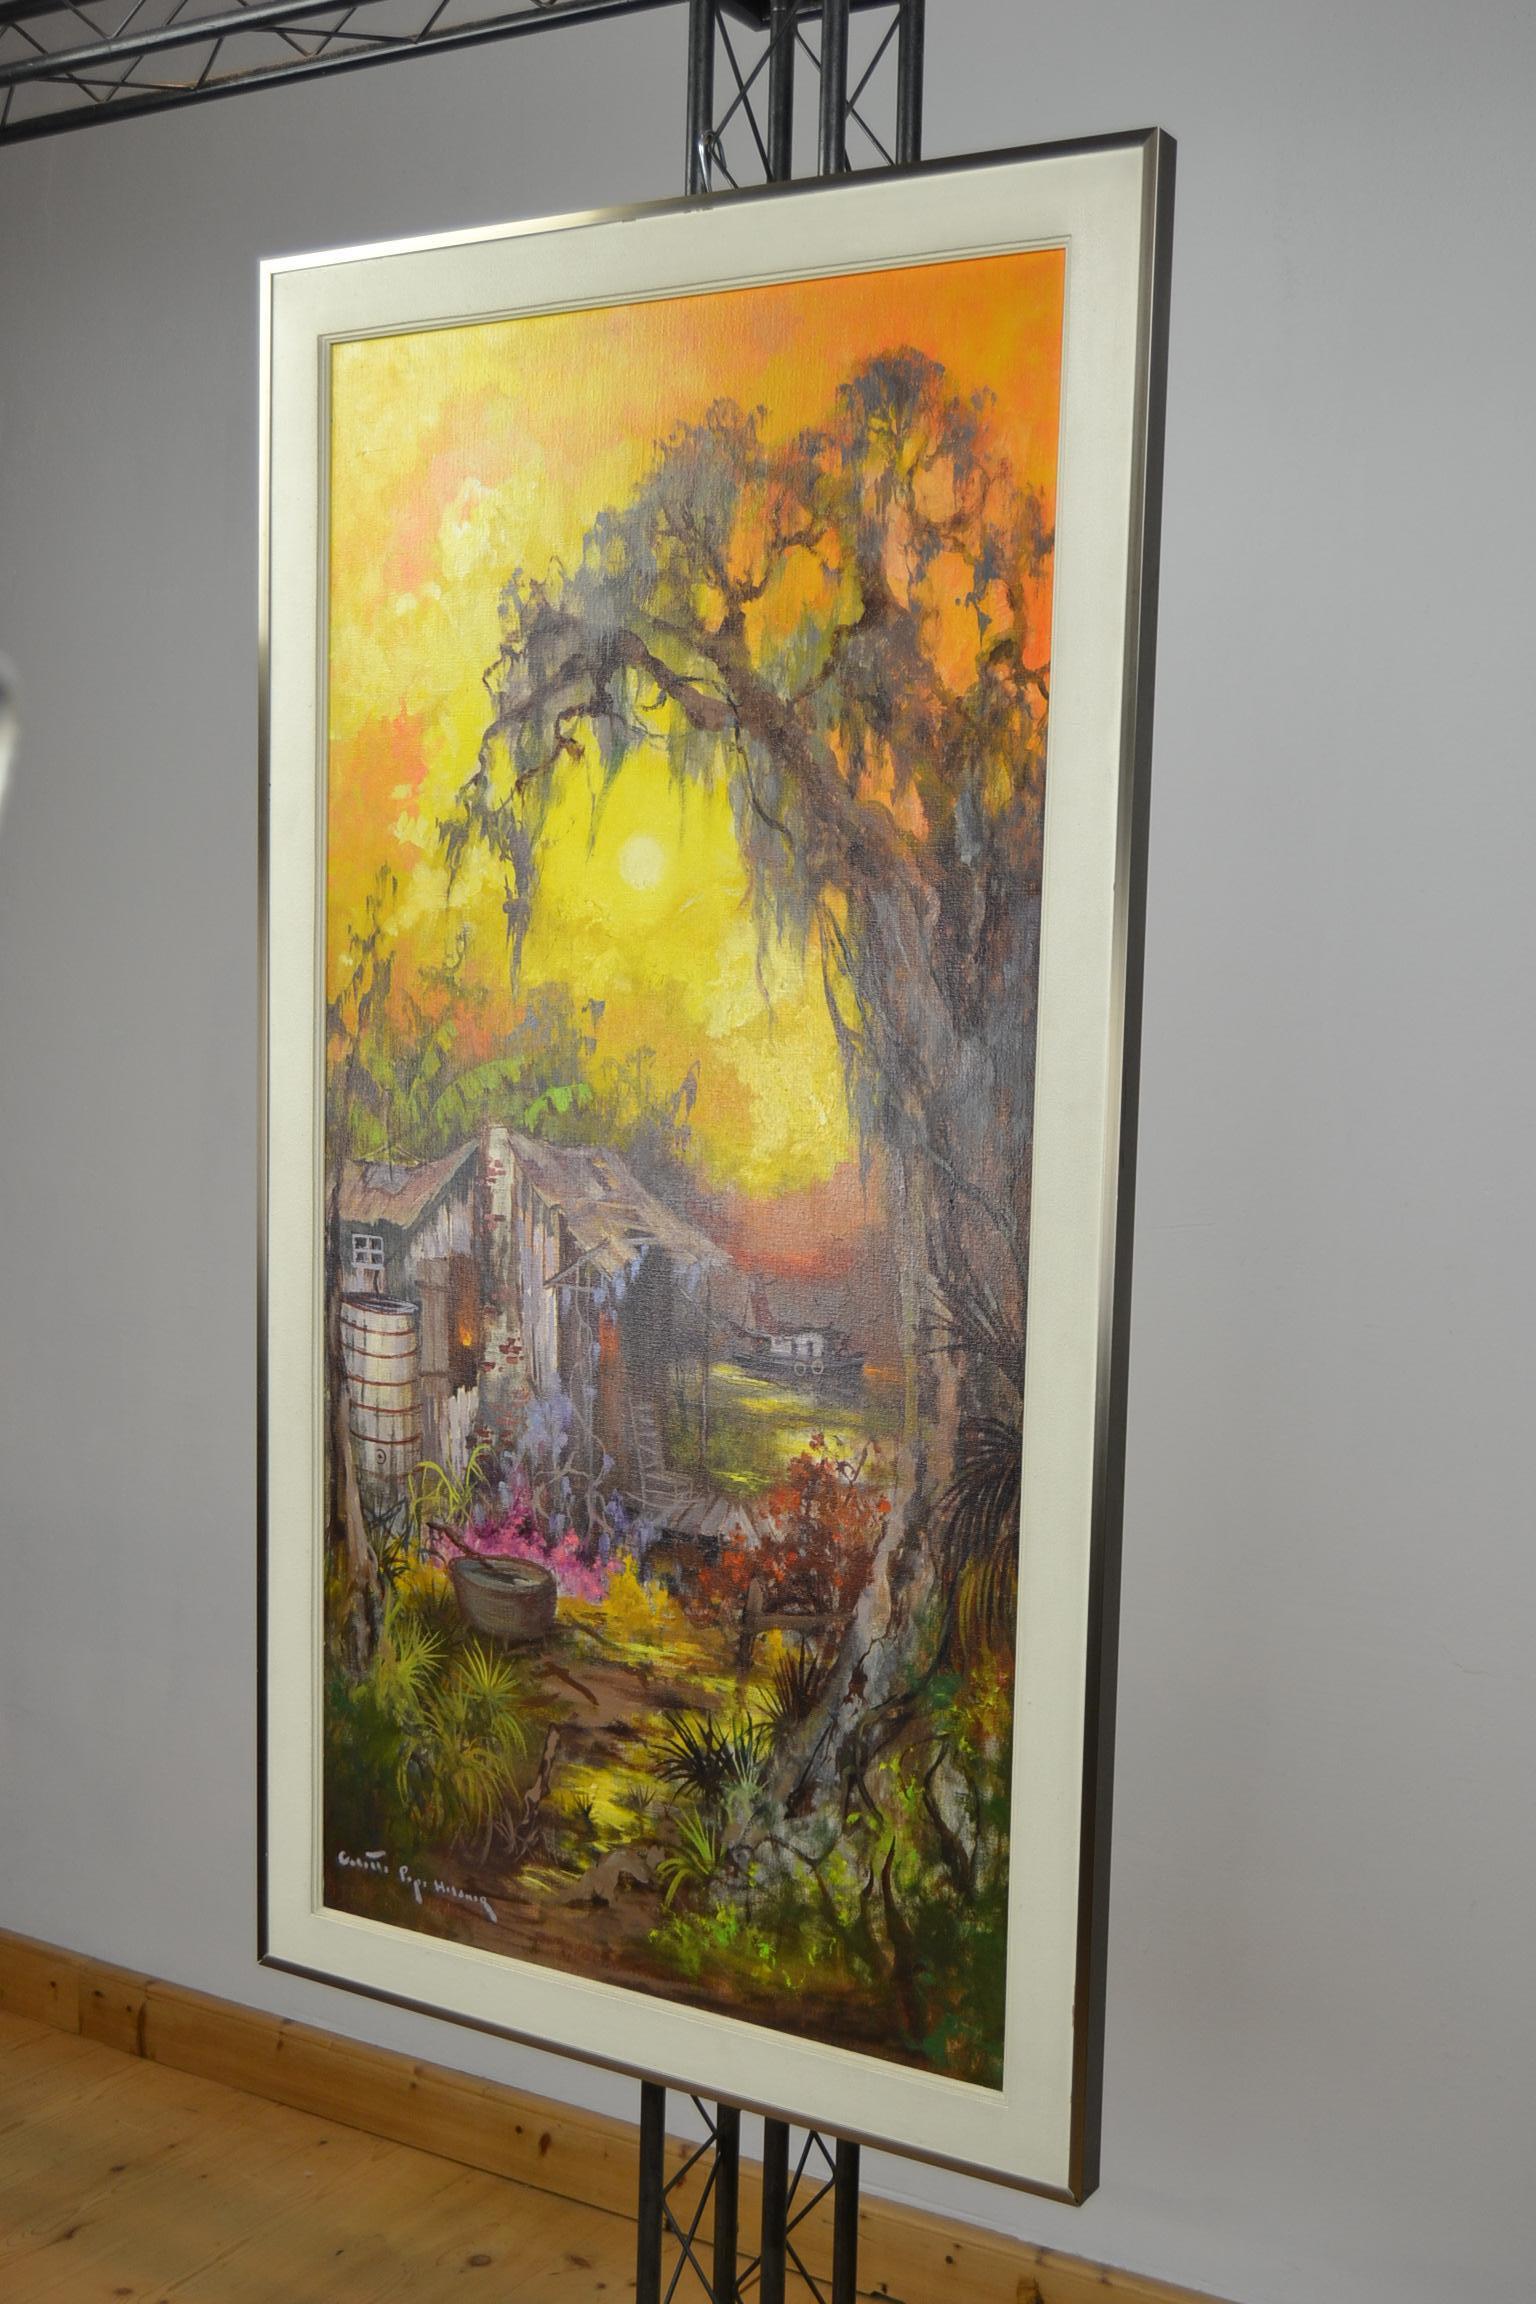 Colette Pope Heldner Swamp Idyll oil on canvas painting.

This Art Work made by Colette Pope Heldner, an American New Orleans Artist who lived from 1902 - 1990, has spectacular colors and details. The more you look at this painting, the more you